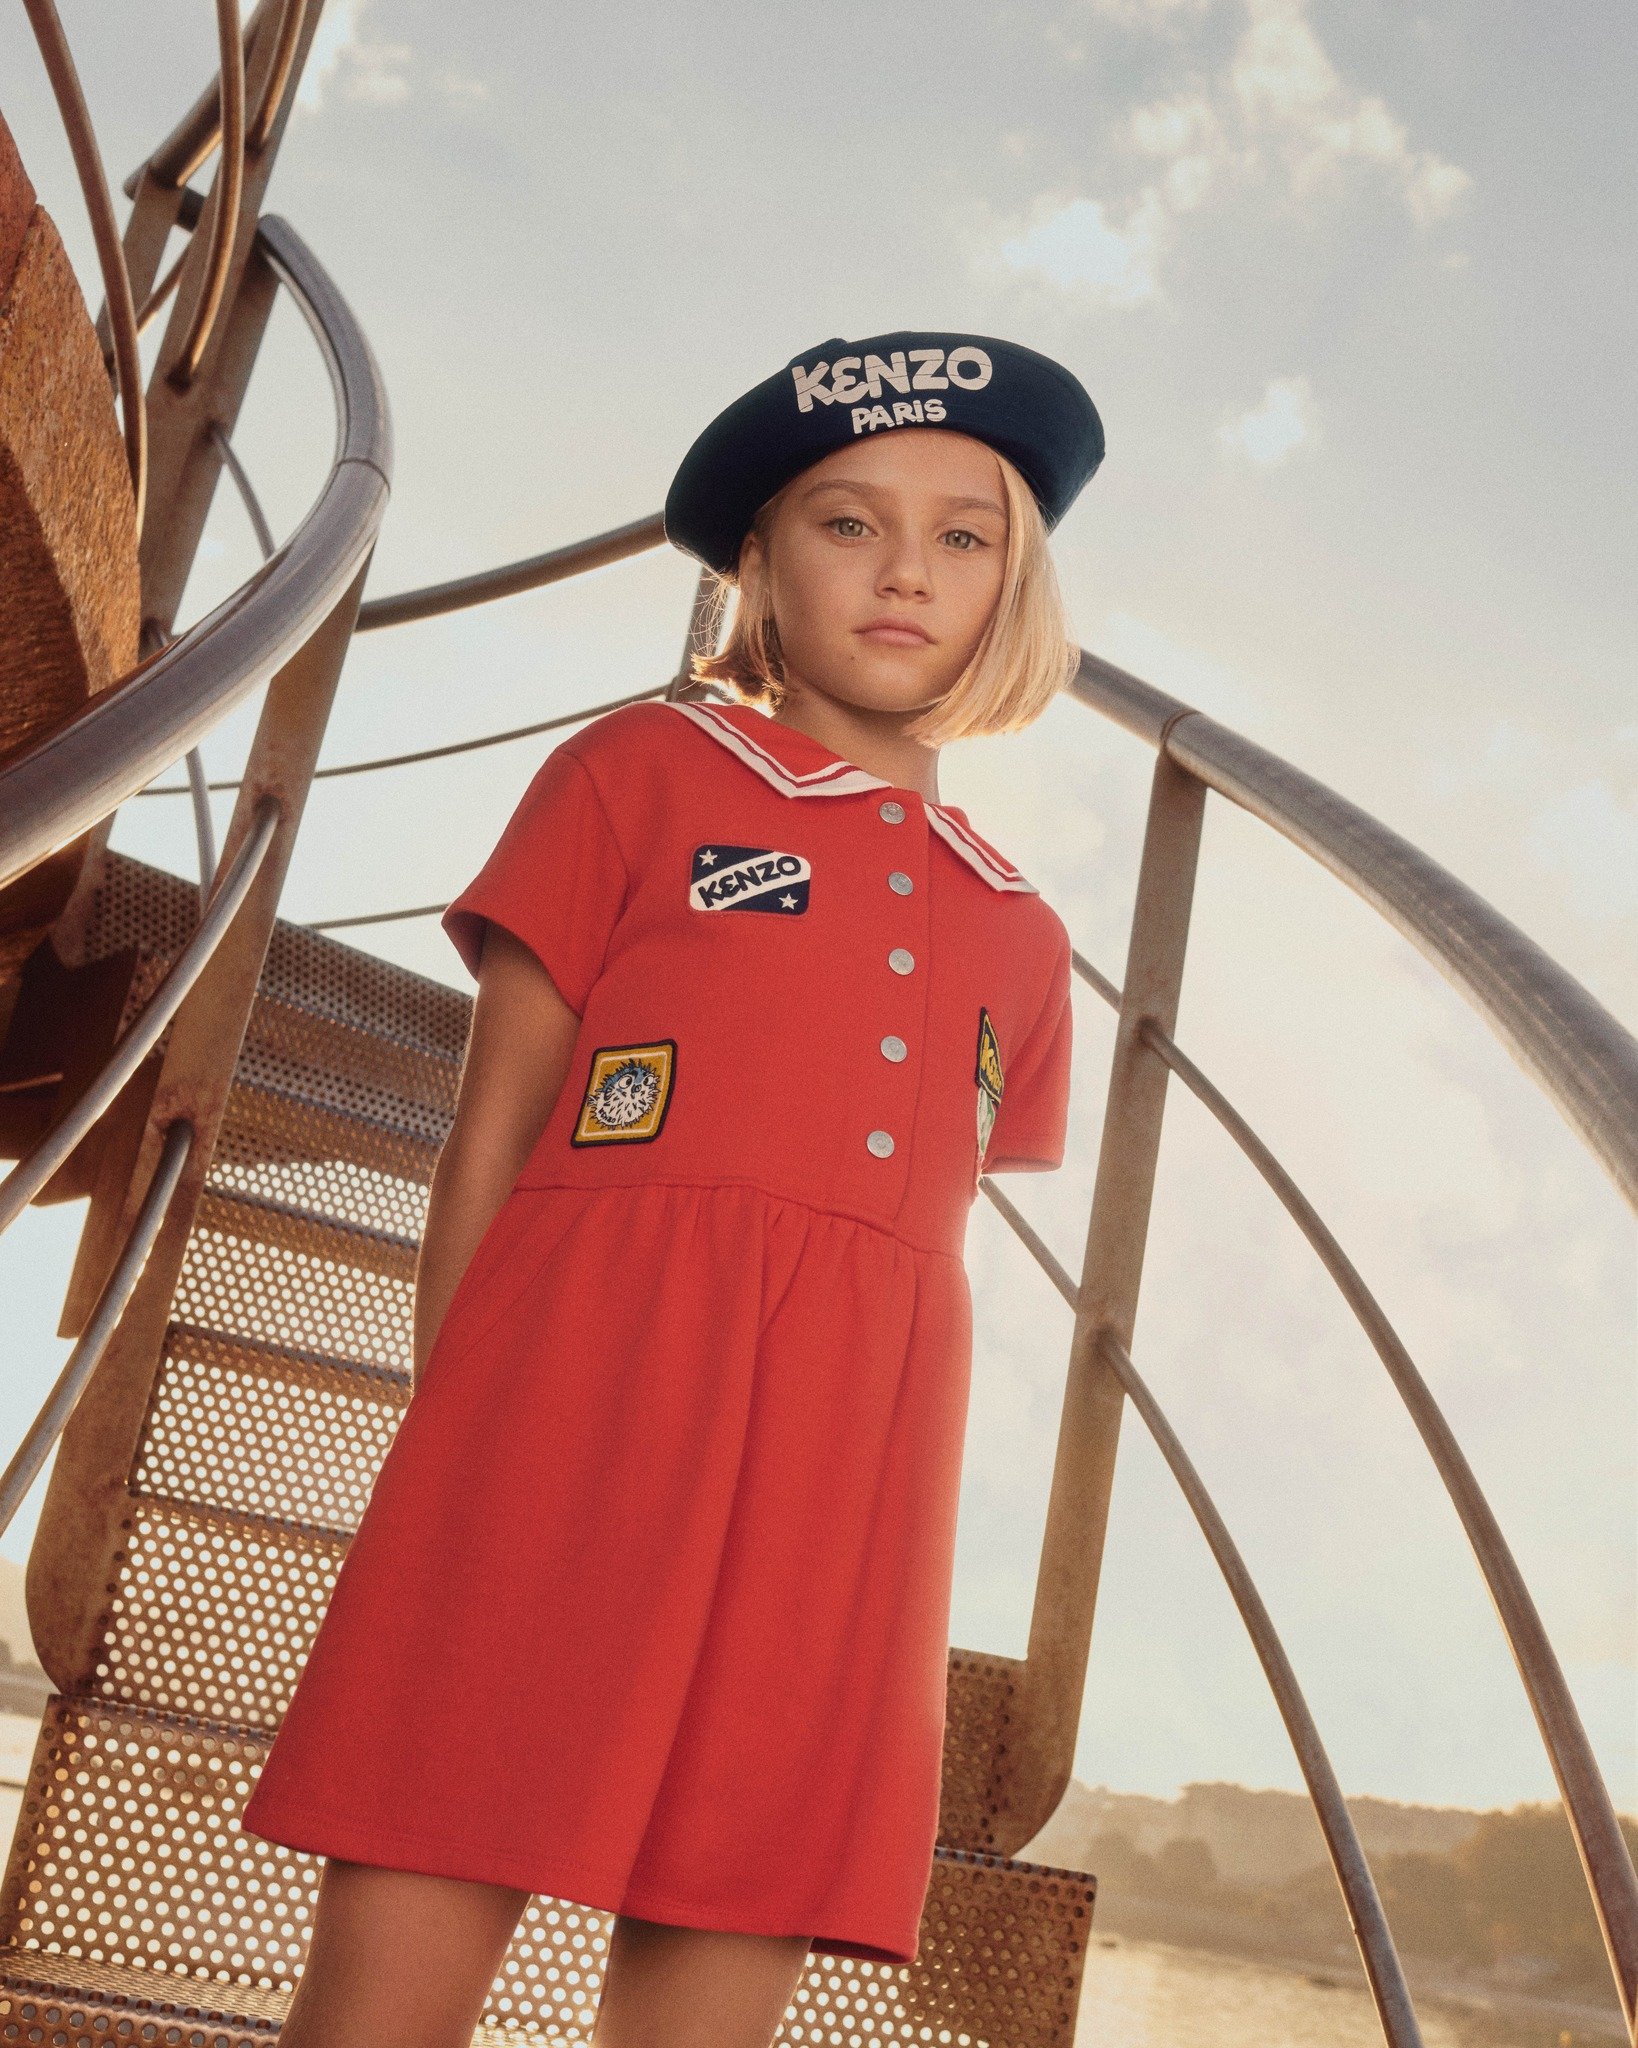 Red vibes By Kenzo ❤<br/>
<br/>
#lapinhouse #girloutfits #childrensfashion #newcollection #kidsoutfits #inspo #pinterrestaesthetic